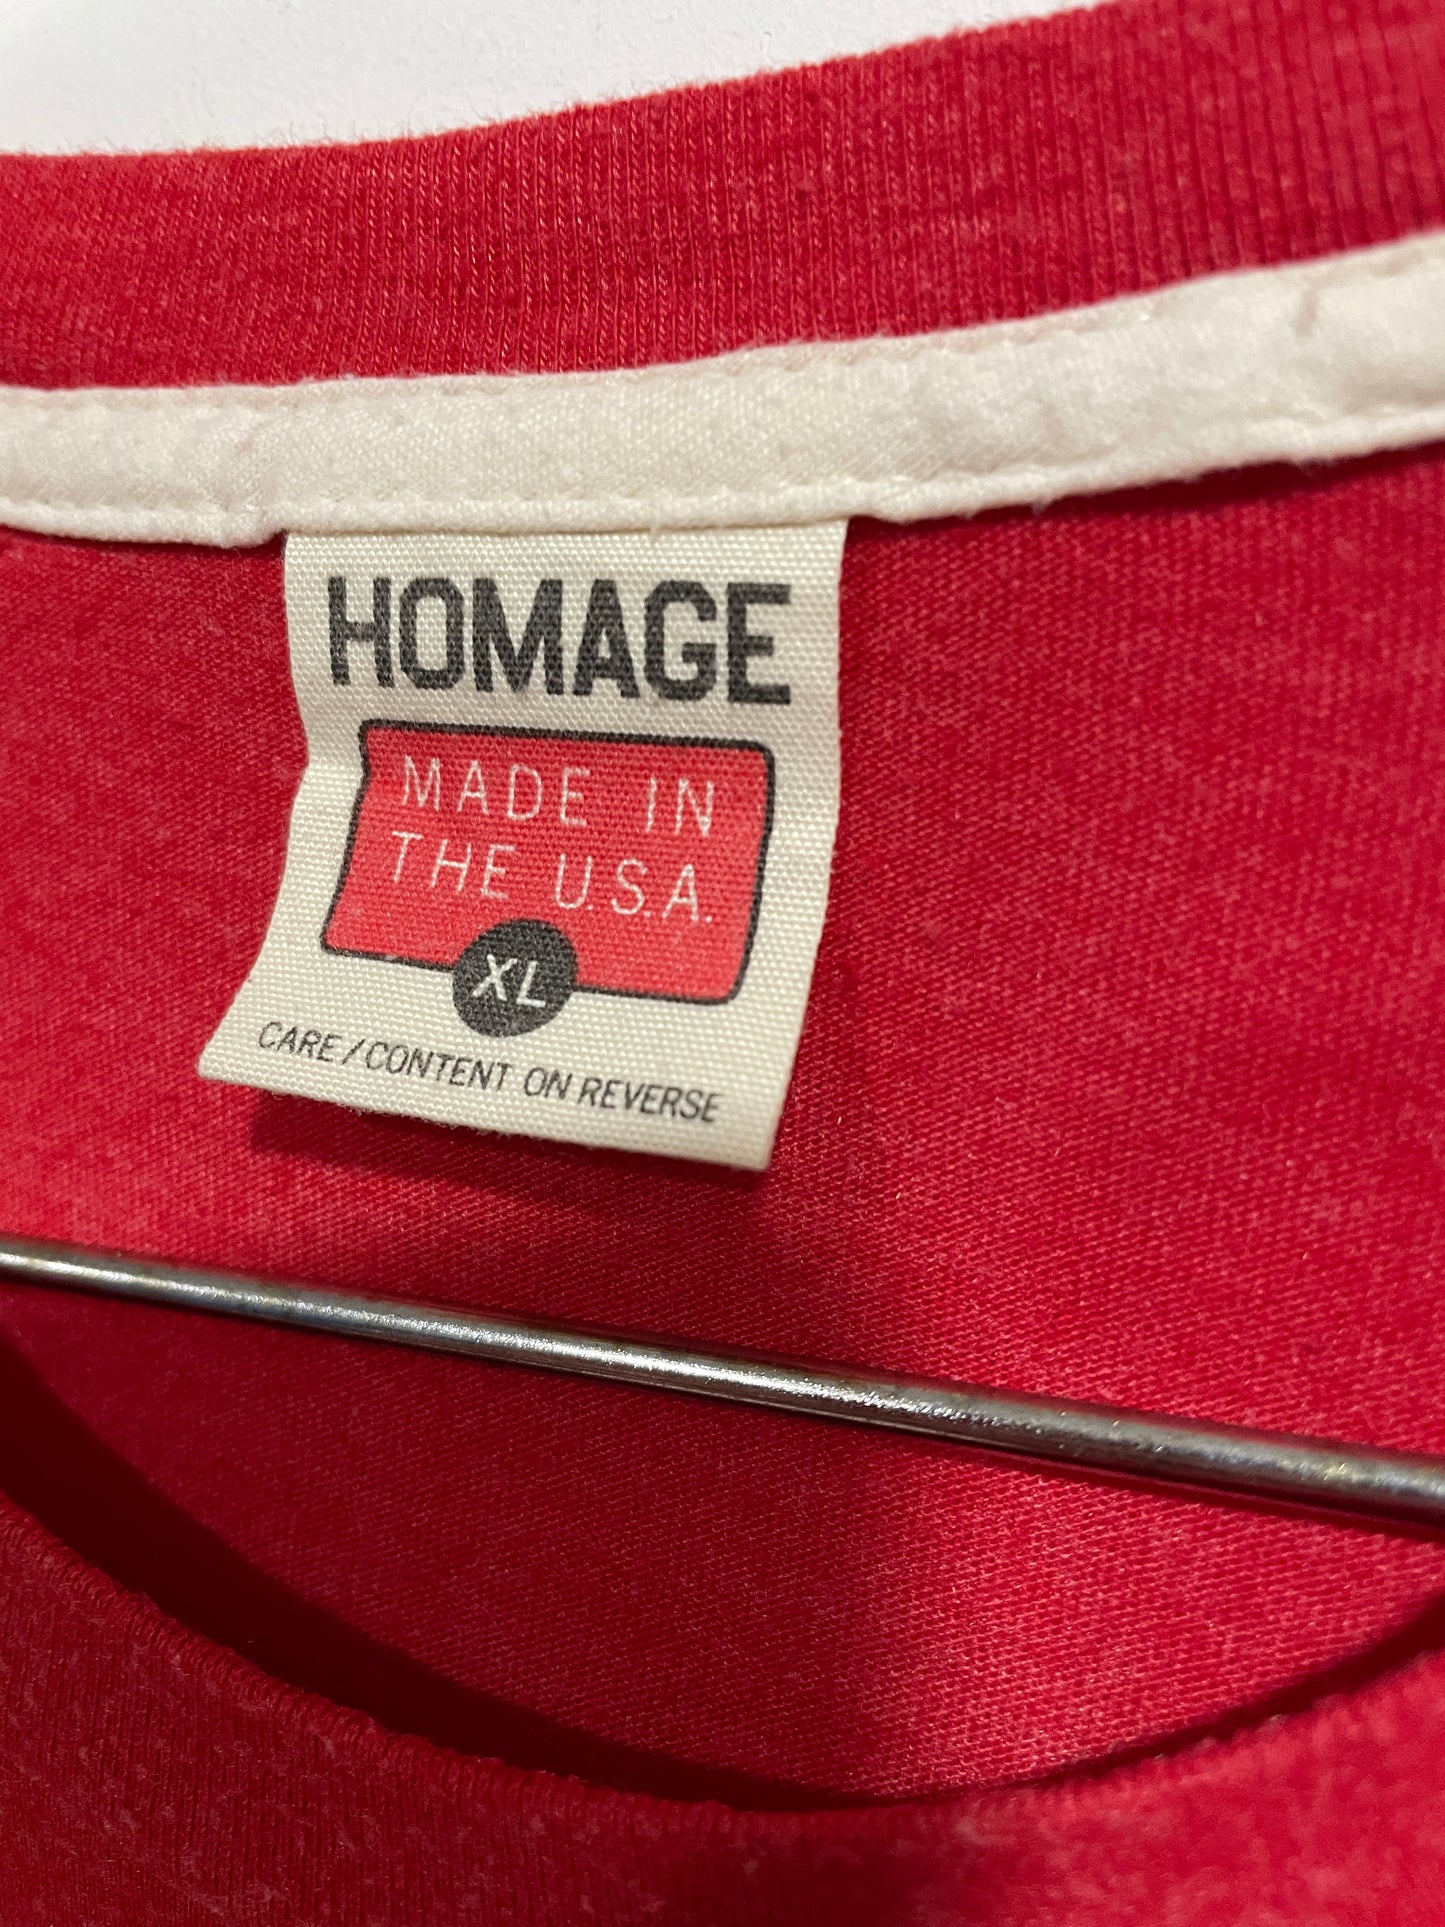 T shirt Homage made in USA (B329)